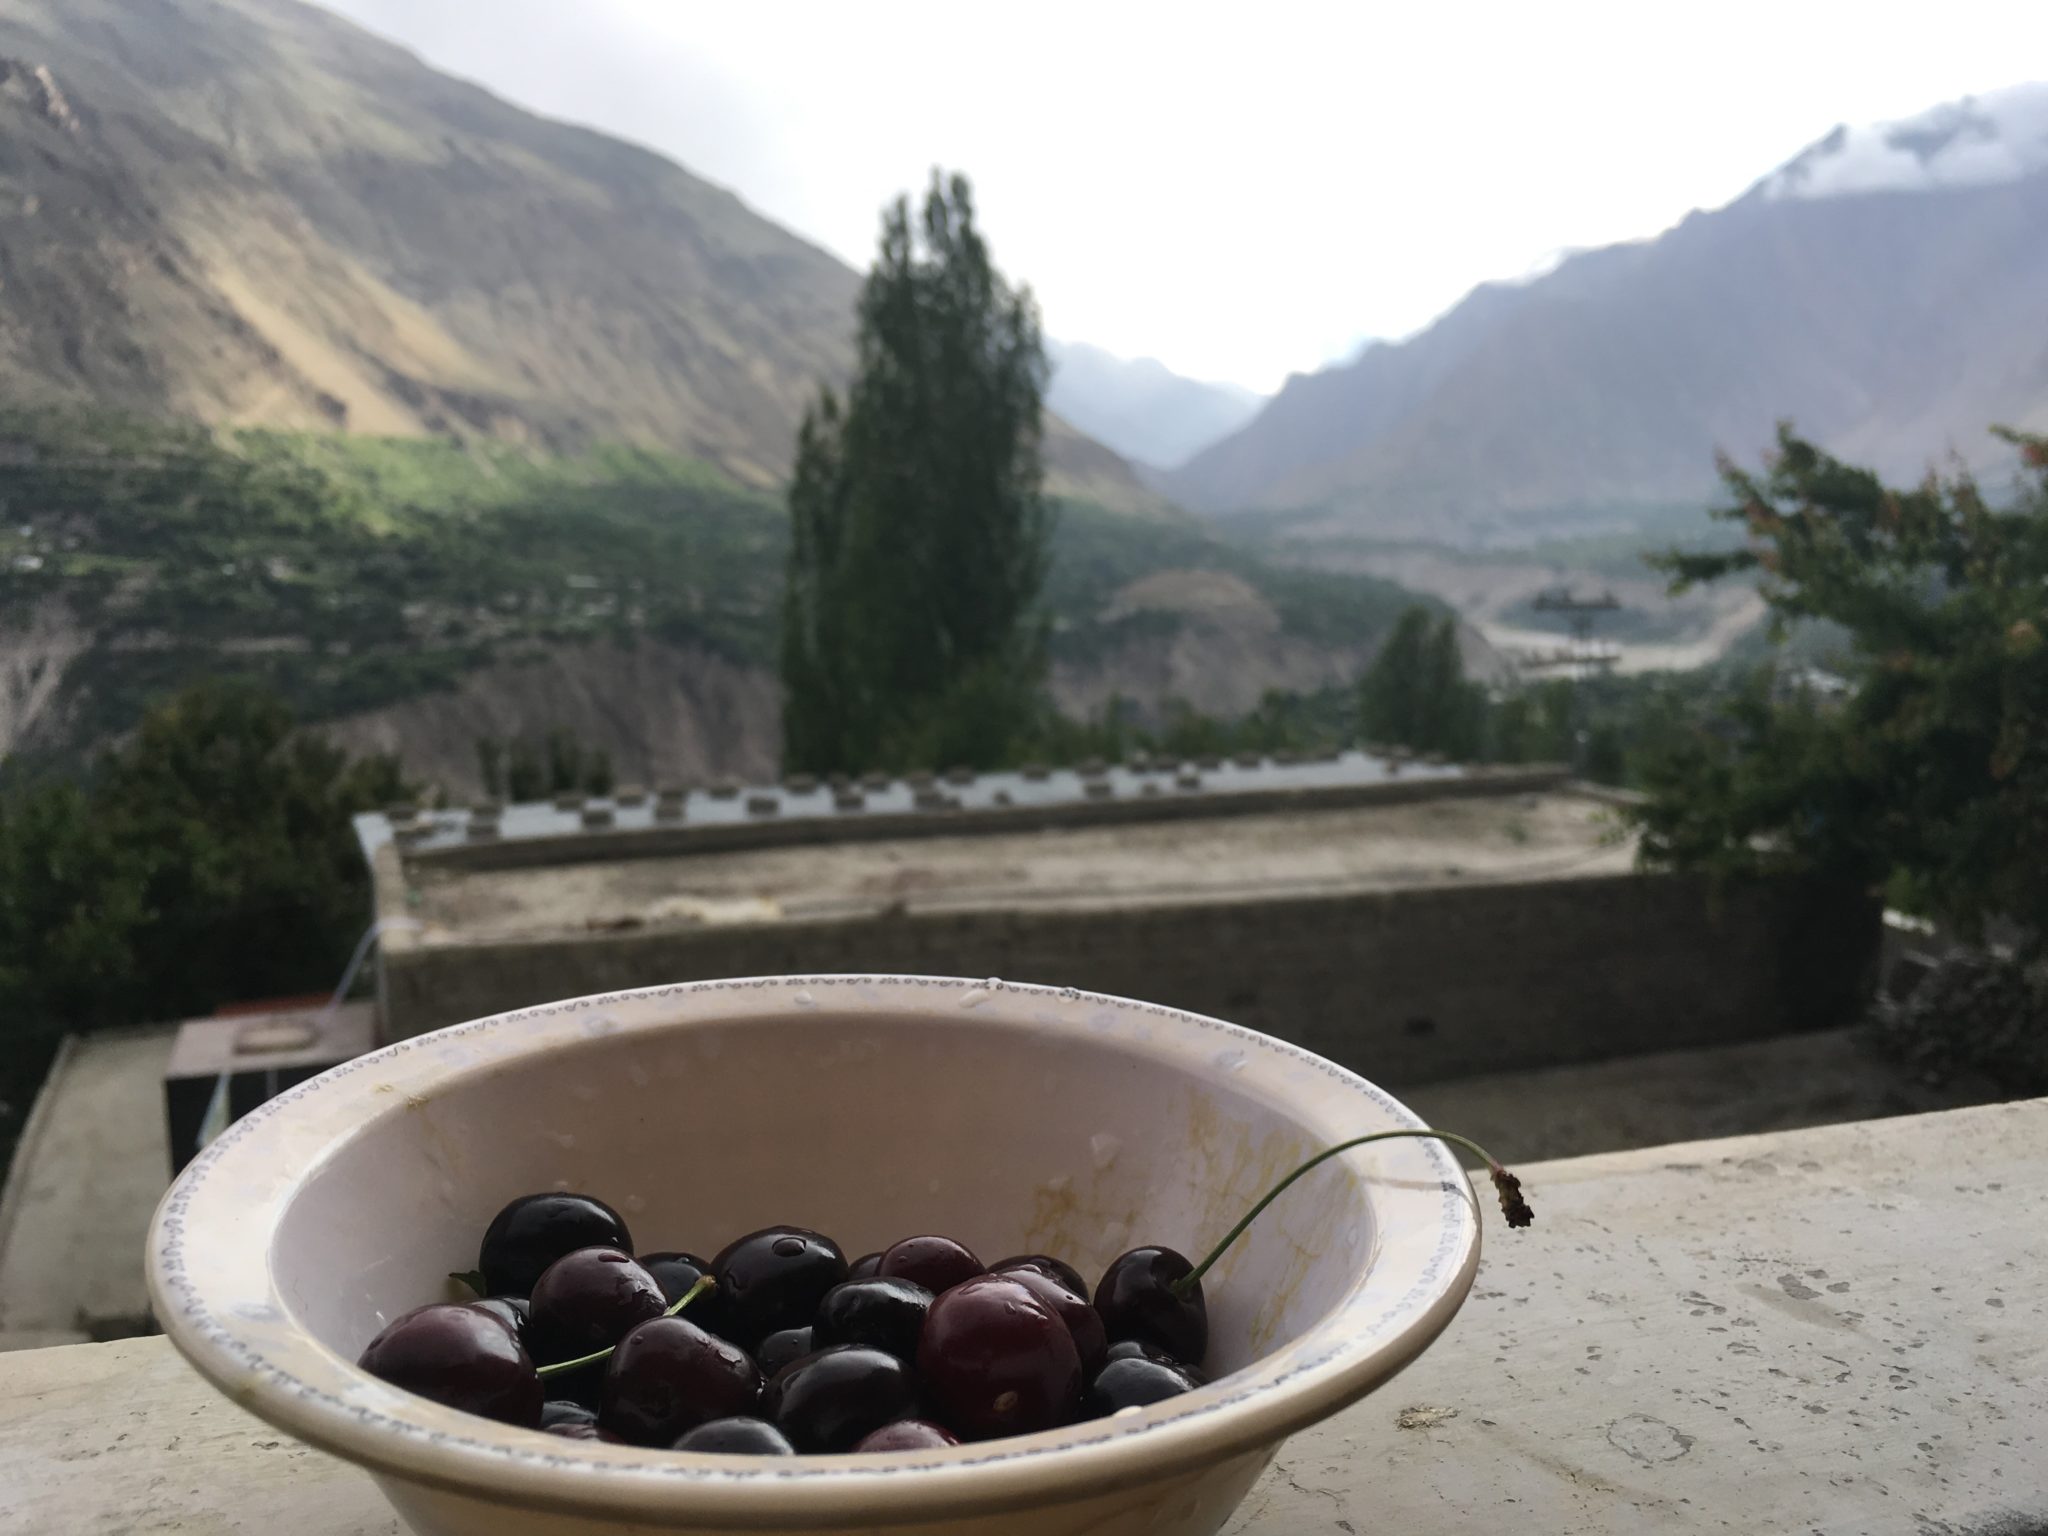 Cherries in the late afternoon as the sun sinks over the Hunza Valley